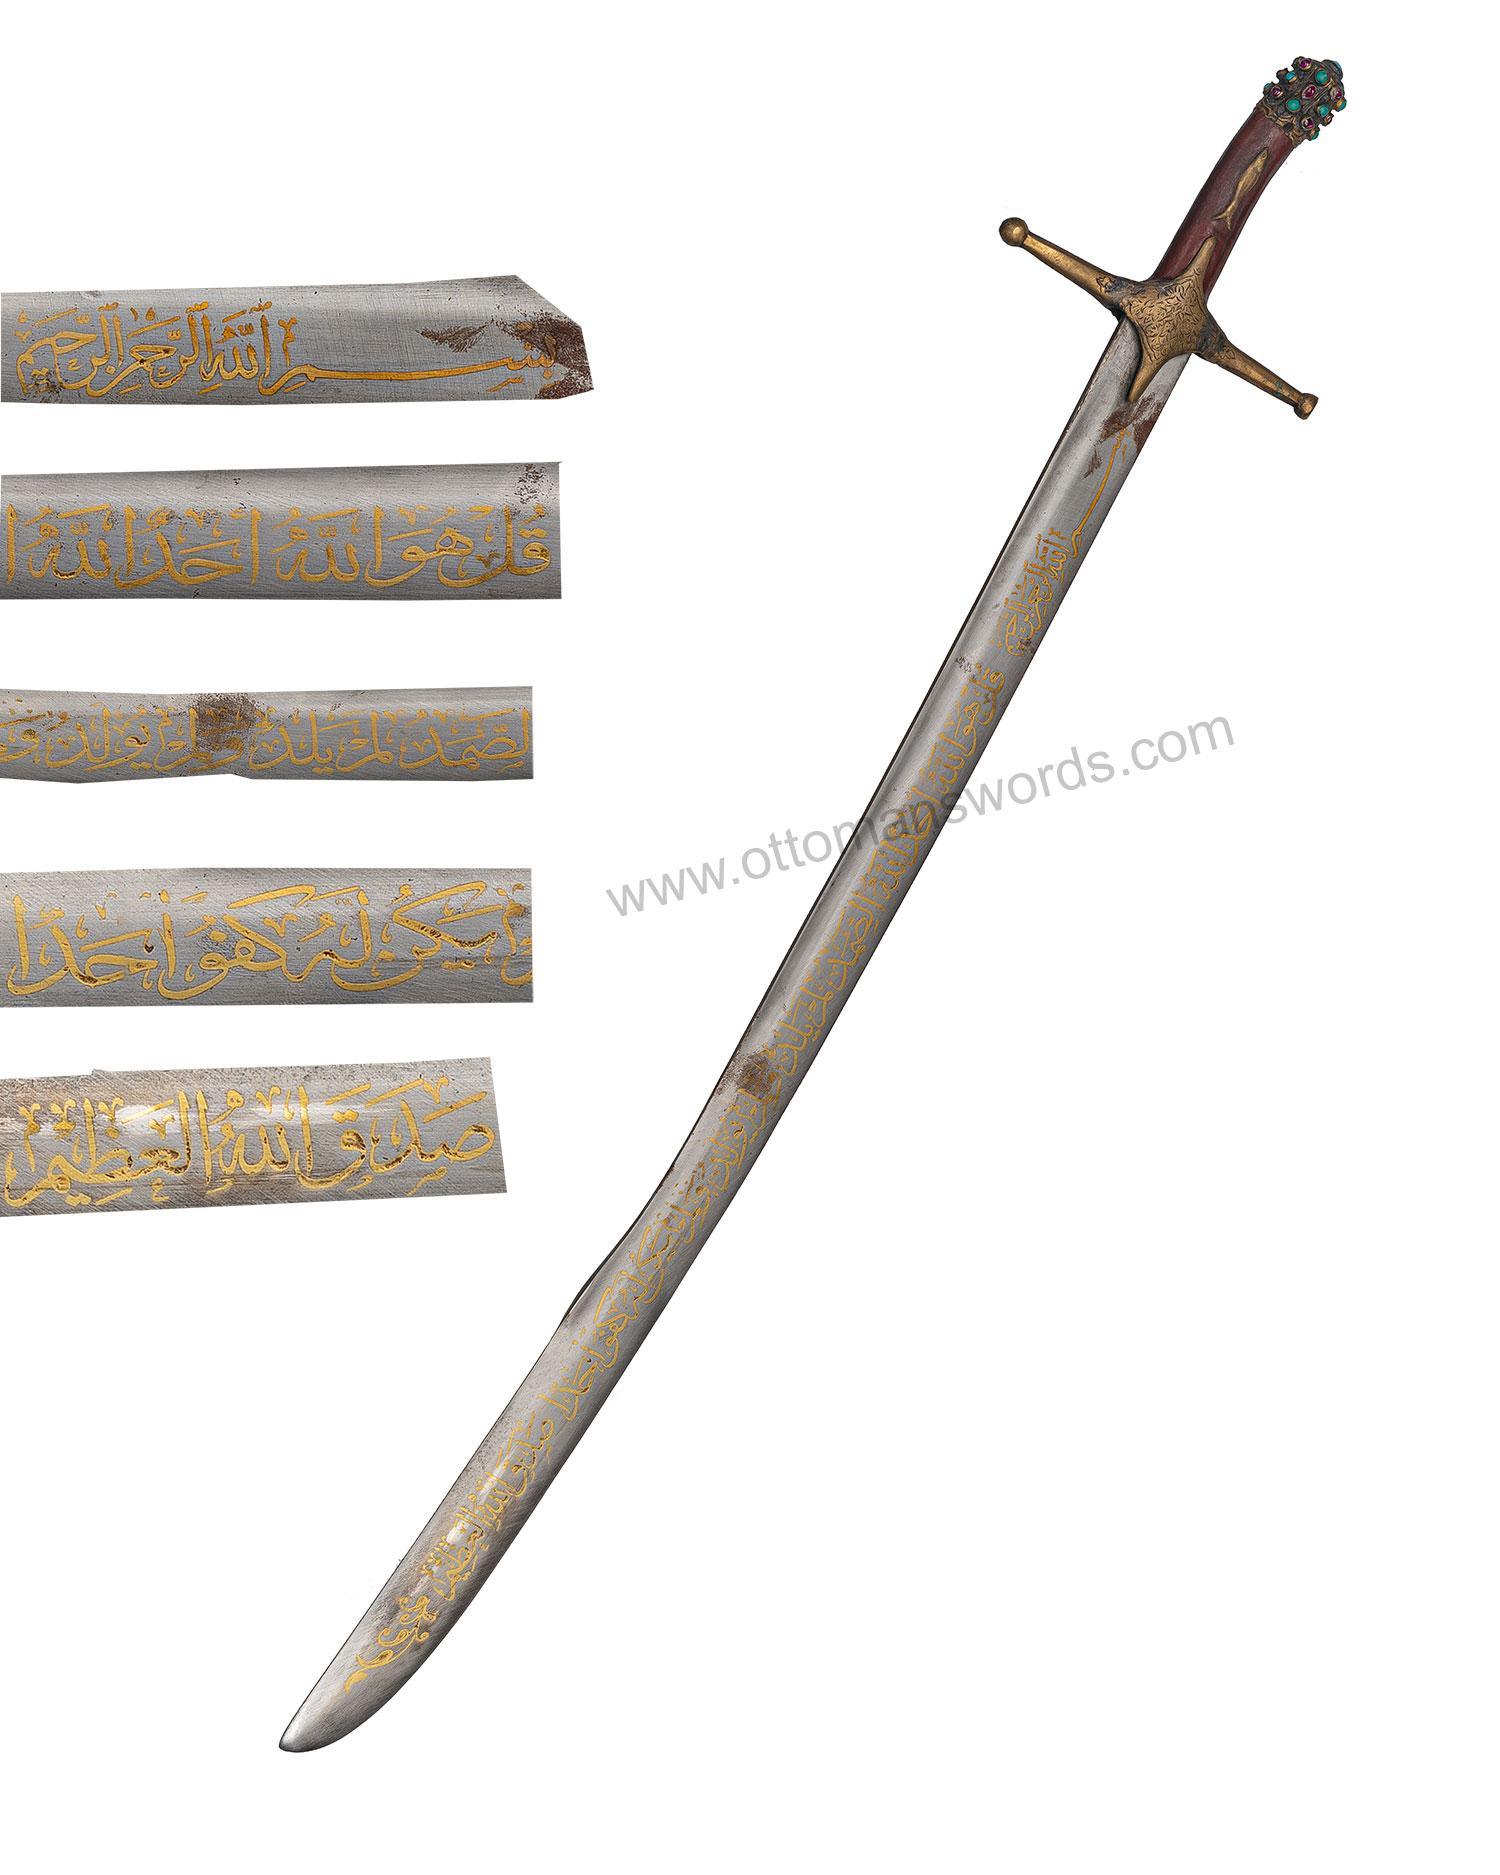 Sword of Suleiman the Magnificent (6)